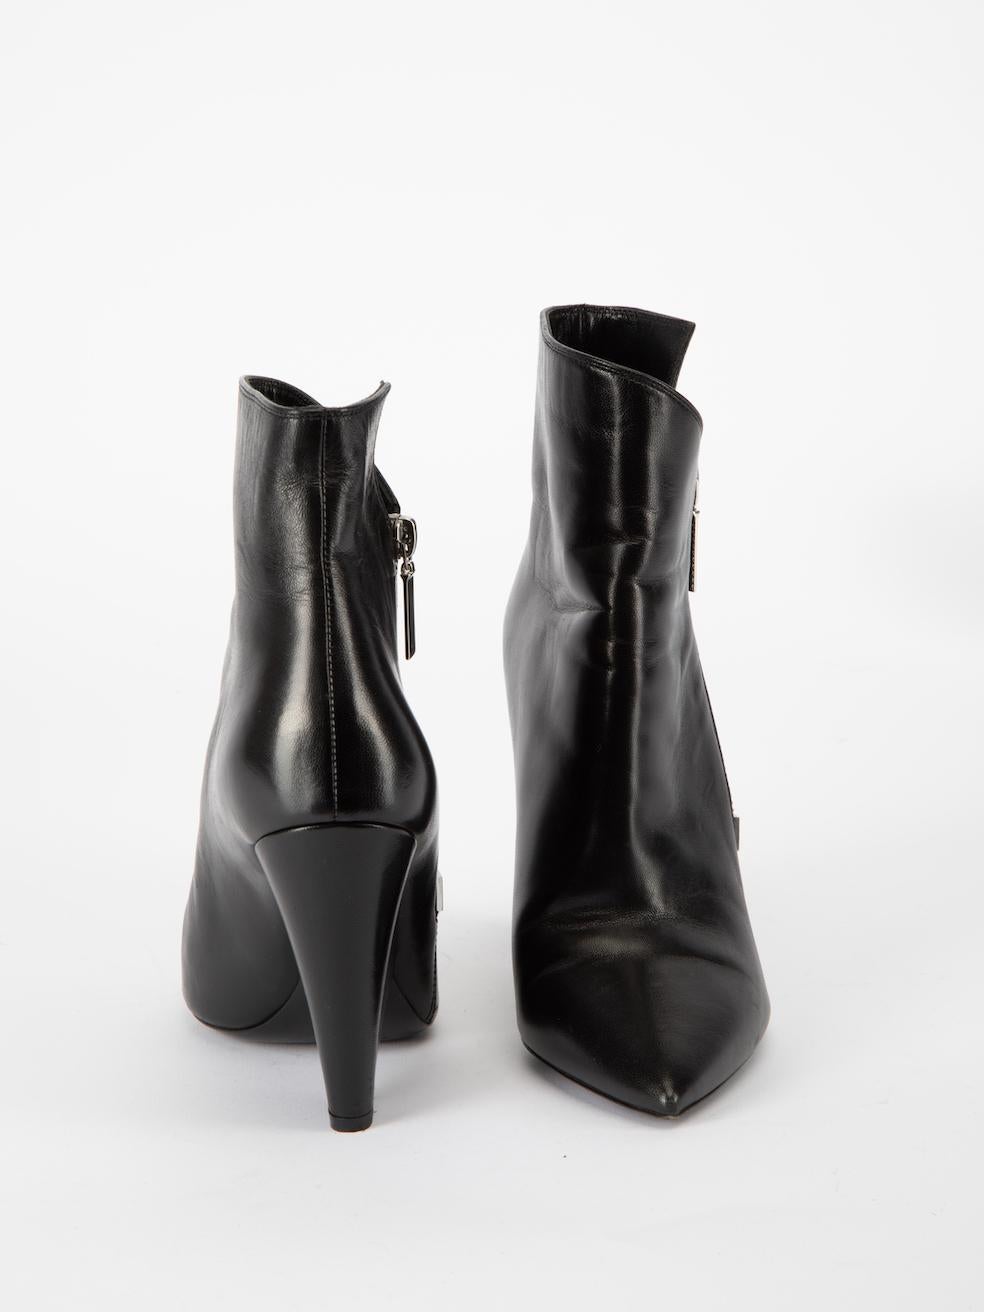 Saint Laurent Women's Black Niki Pointed Toe Wedge Ankle Boots In Excellent Condition For Sale In London, GB